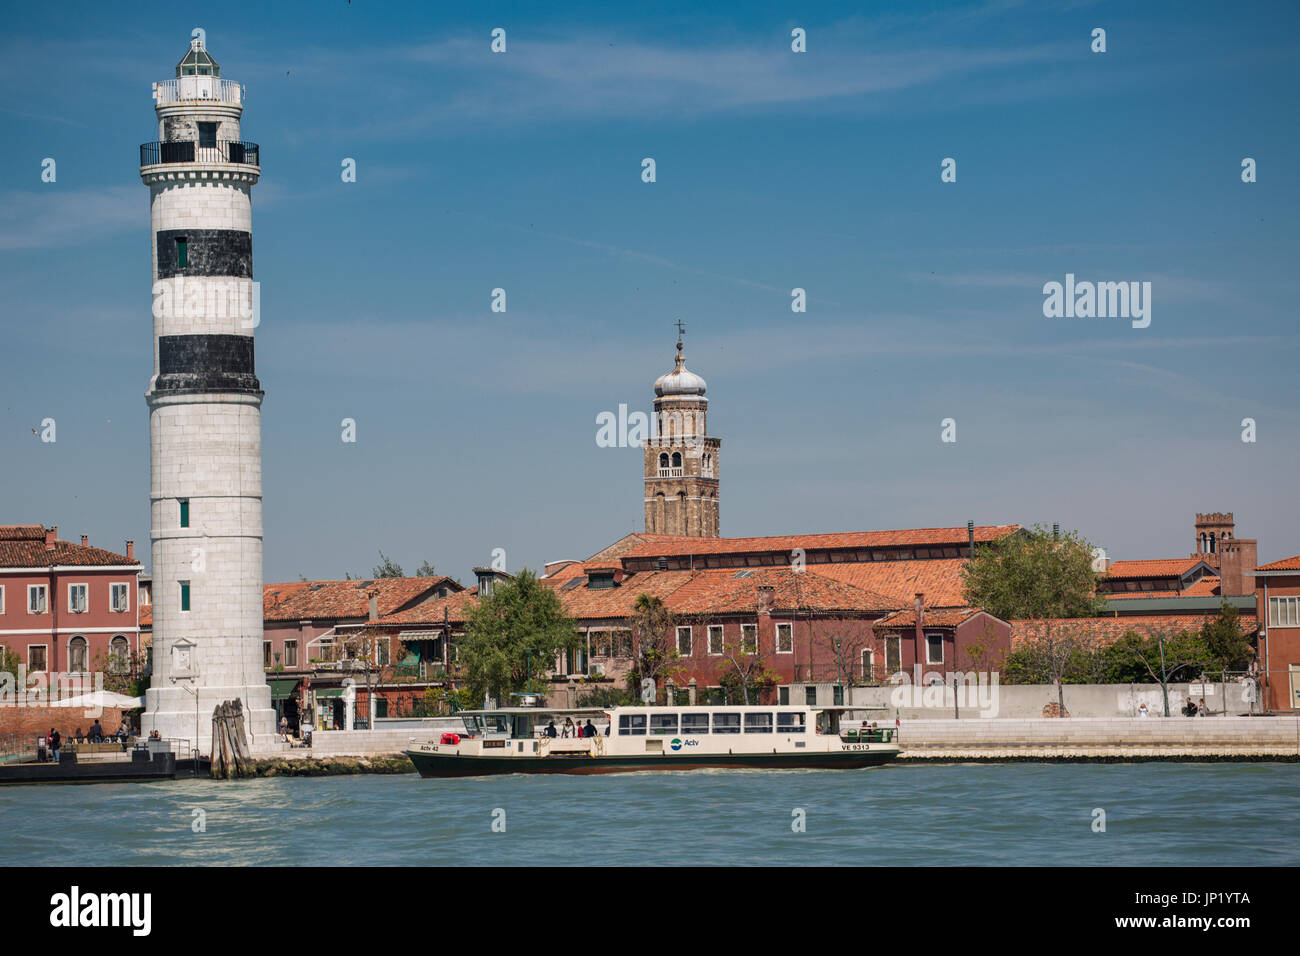 Murano, Venice, Italy - April 28, 2012: The lighthouse (Faro) on Murano in the Venetian Lagoon with the church of Pietro Martire behind. A vaporetto brings and takes off passengers. Stock Photo